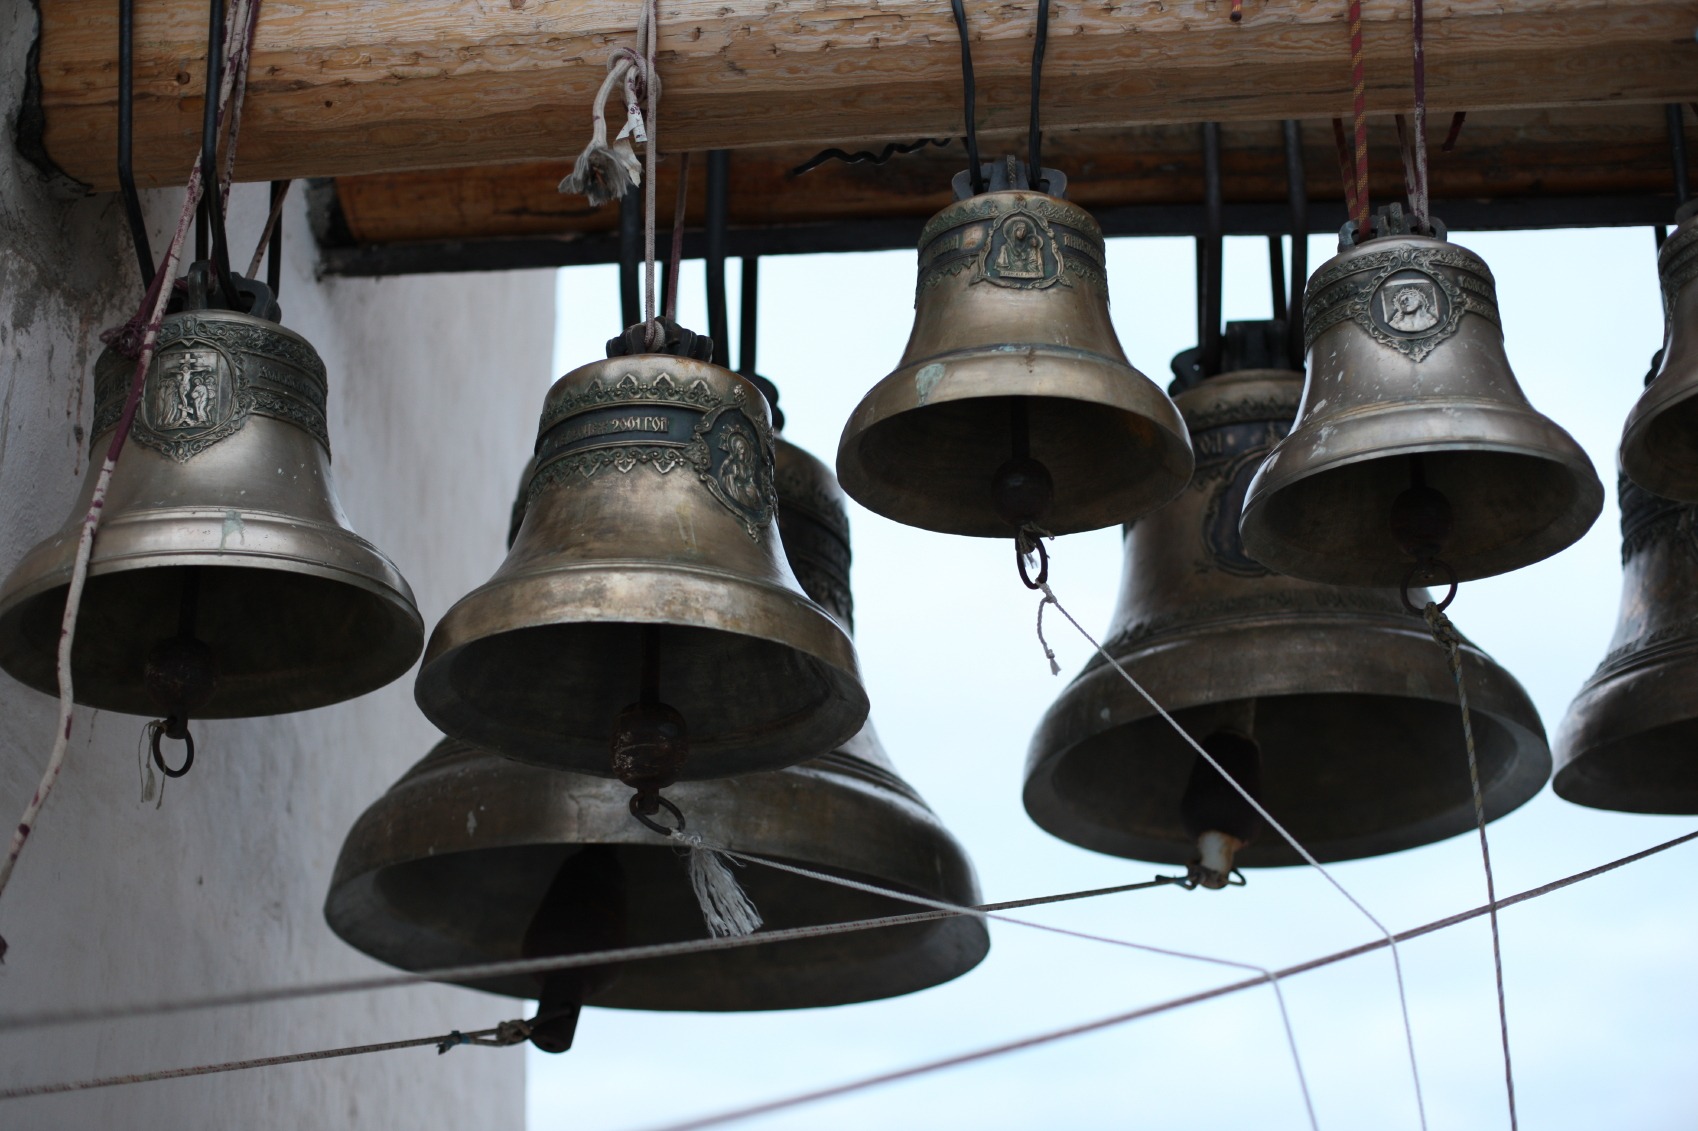 Repeated Church Bells Chimes Create a Negative Externality